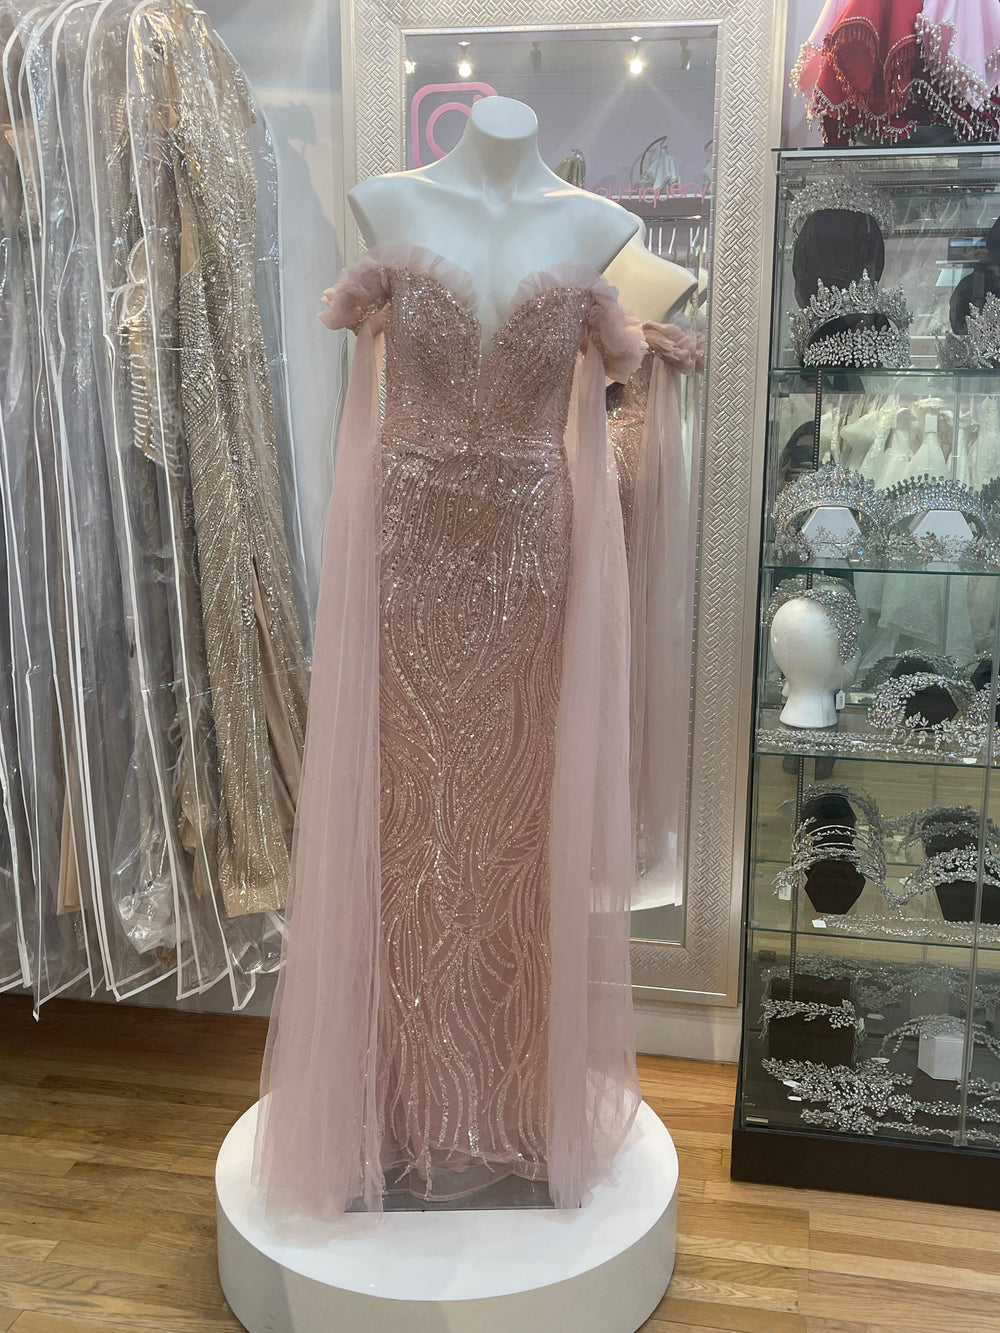 NoraCoutureNY Couture Dress The Lily Gown custom made by NoraCoutureNY